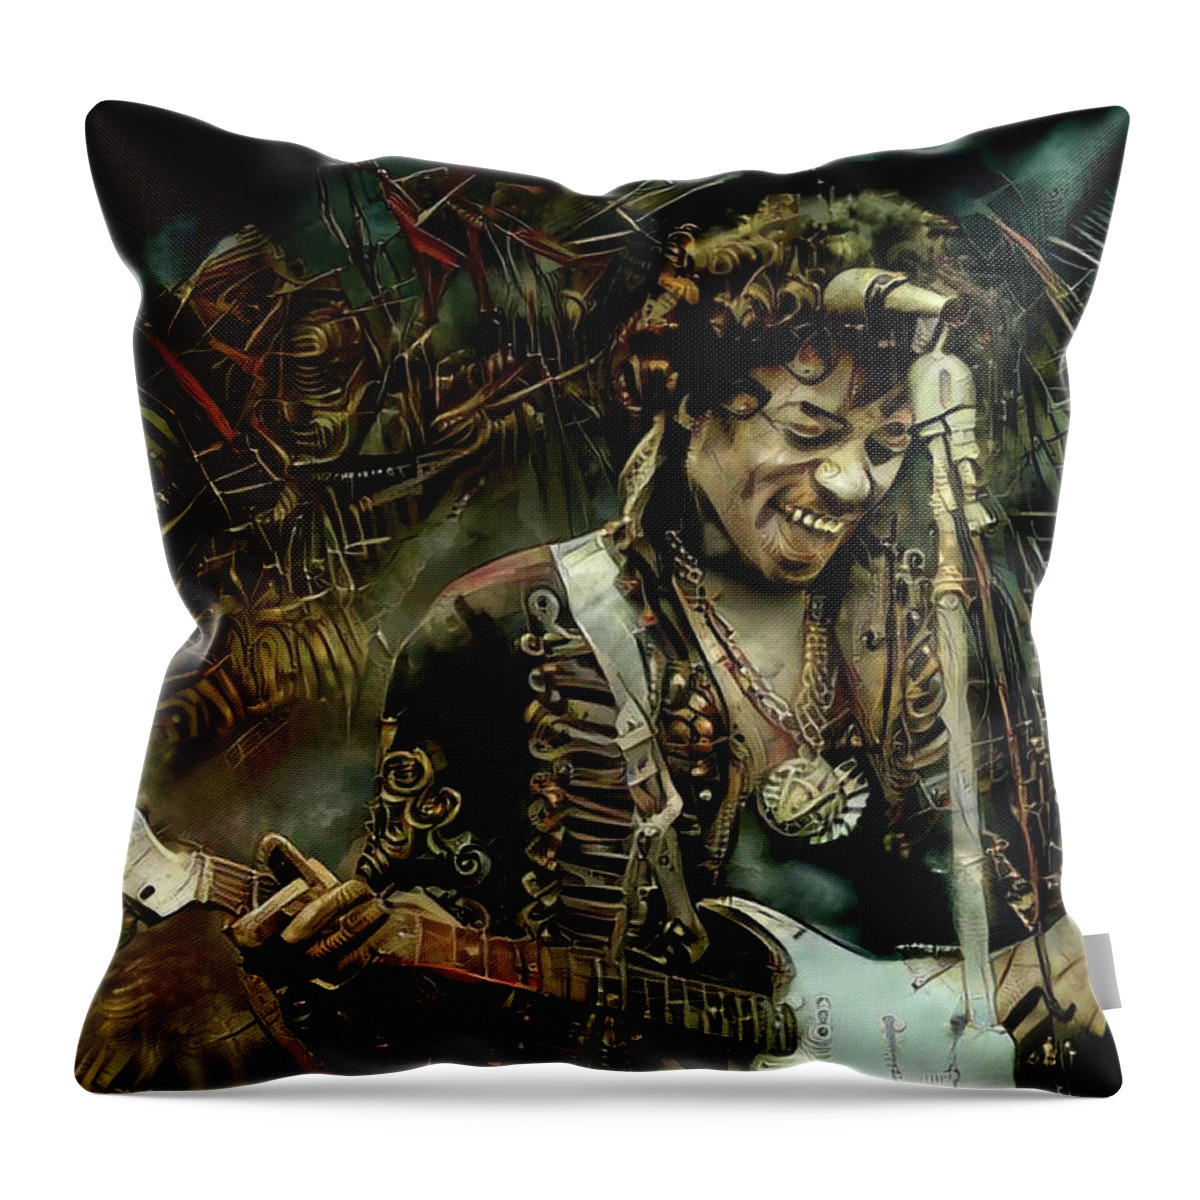 Jimi Hendrix Throw Pillow featuring the mixed media Jimi Hendrix Steampunk style #2 by Lilia S